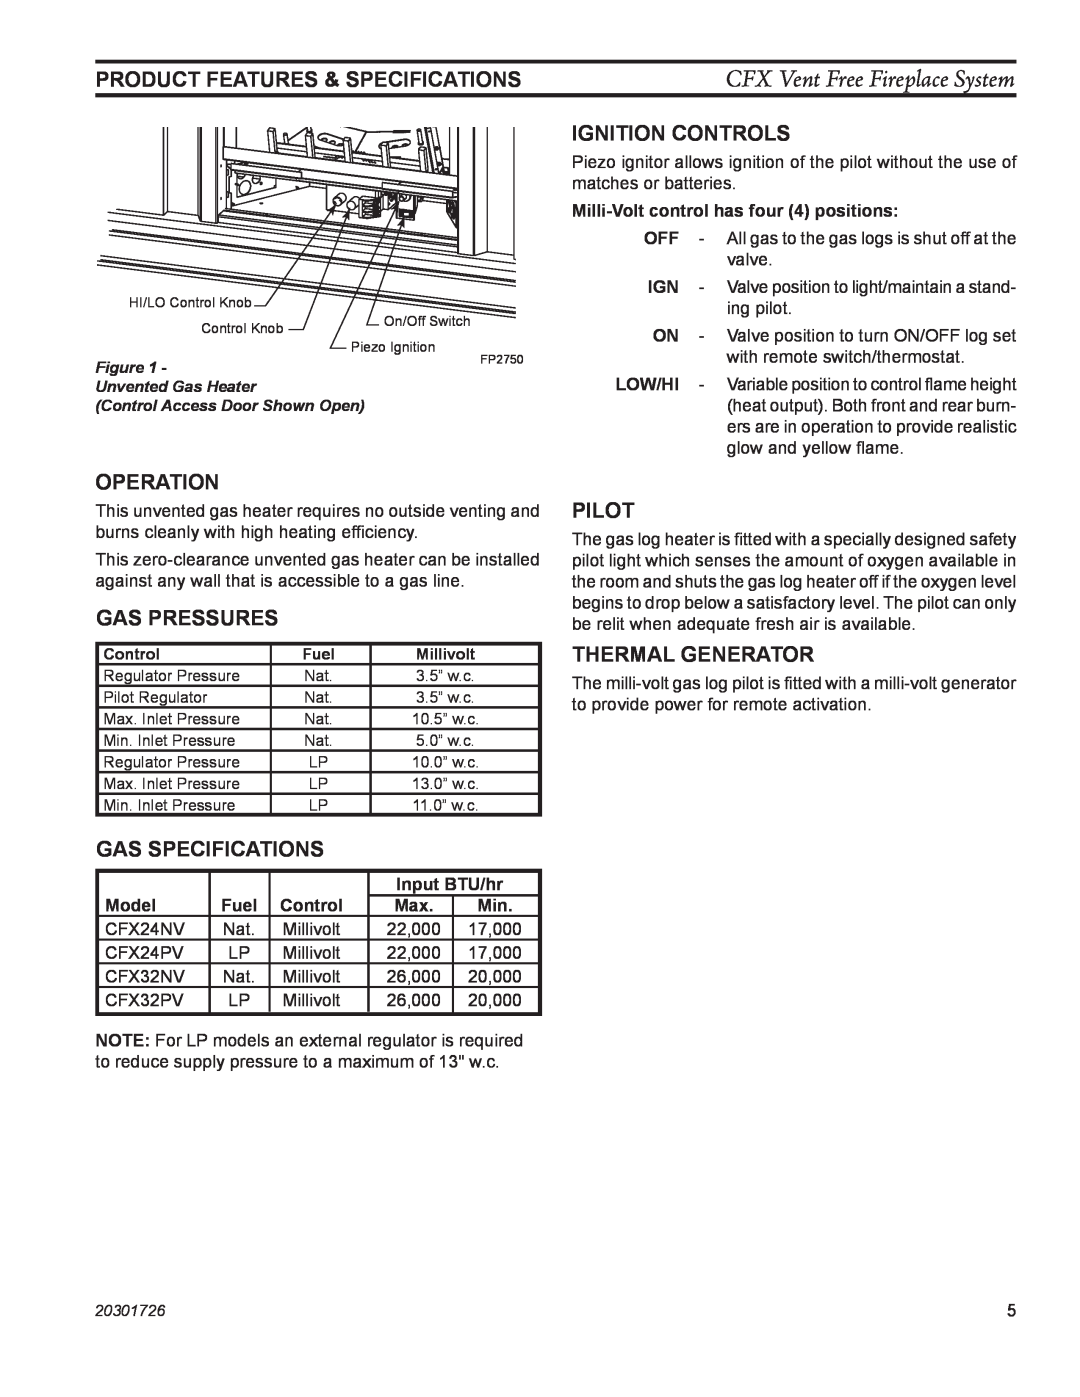 Monessen Hearth CFX32 PRODUCT FEATURES & specifications, CFX Vent Free Fireplace System, operation, GAS pressures, Pilot 